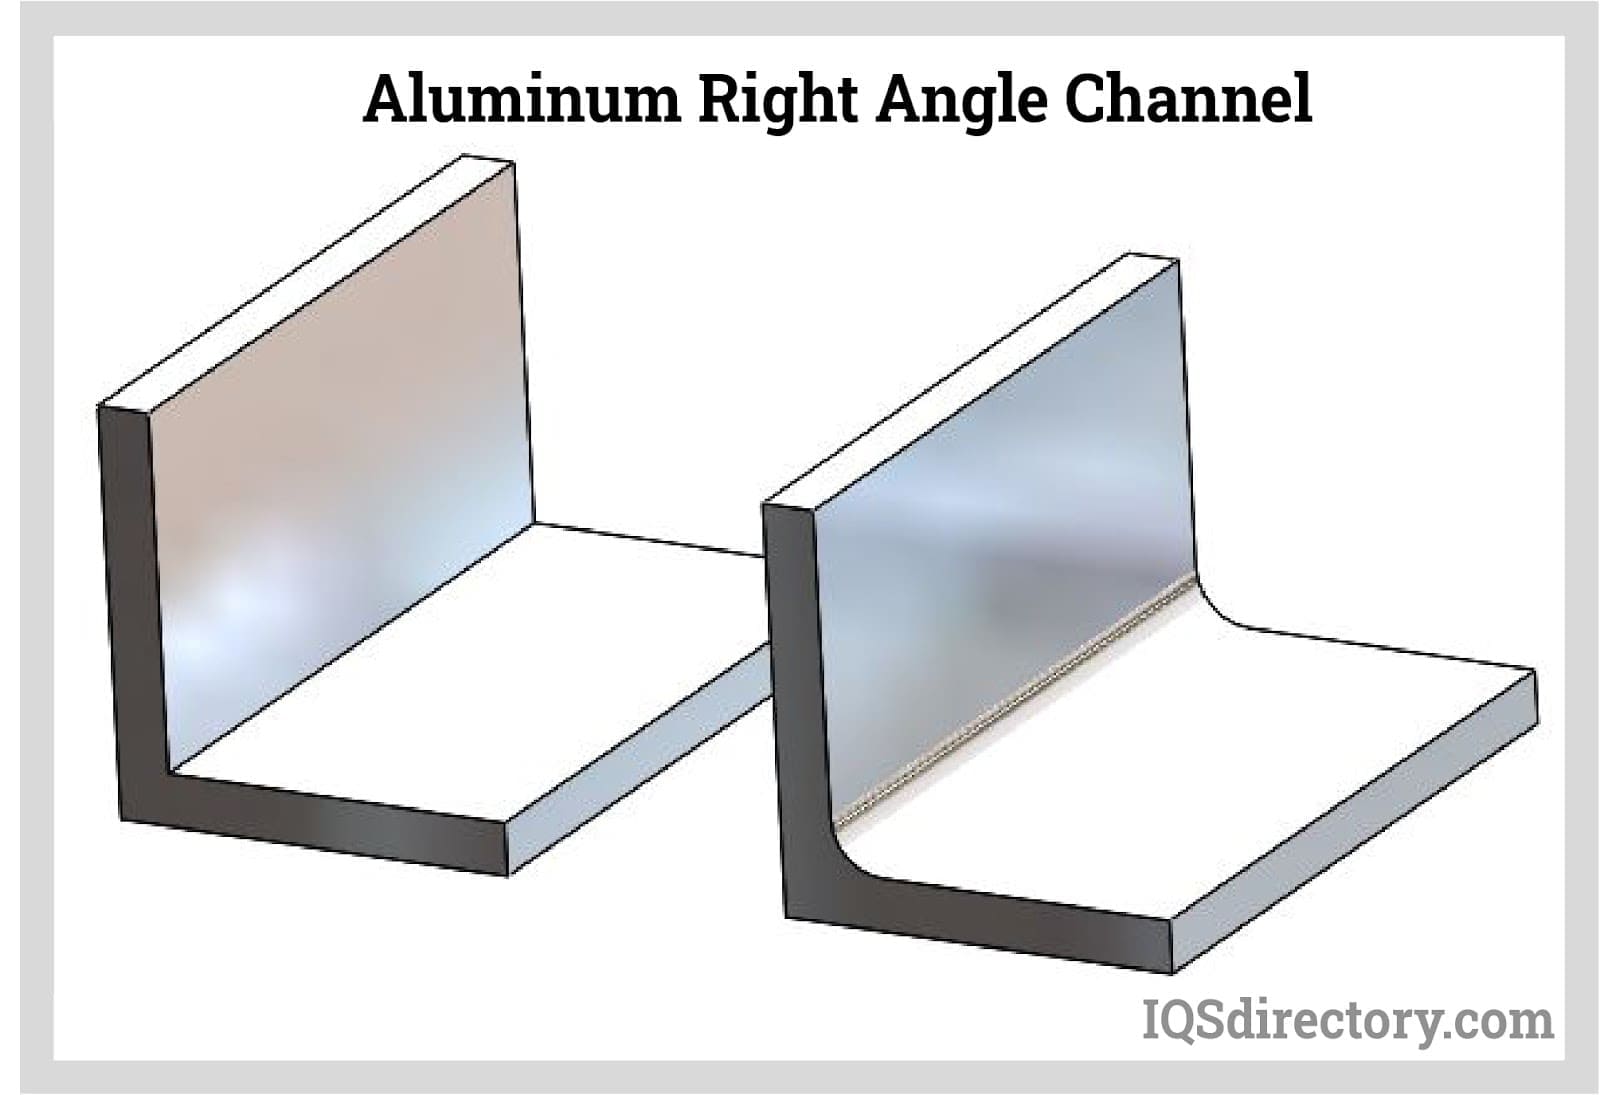 Aluminum Right Angle Channel